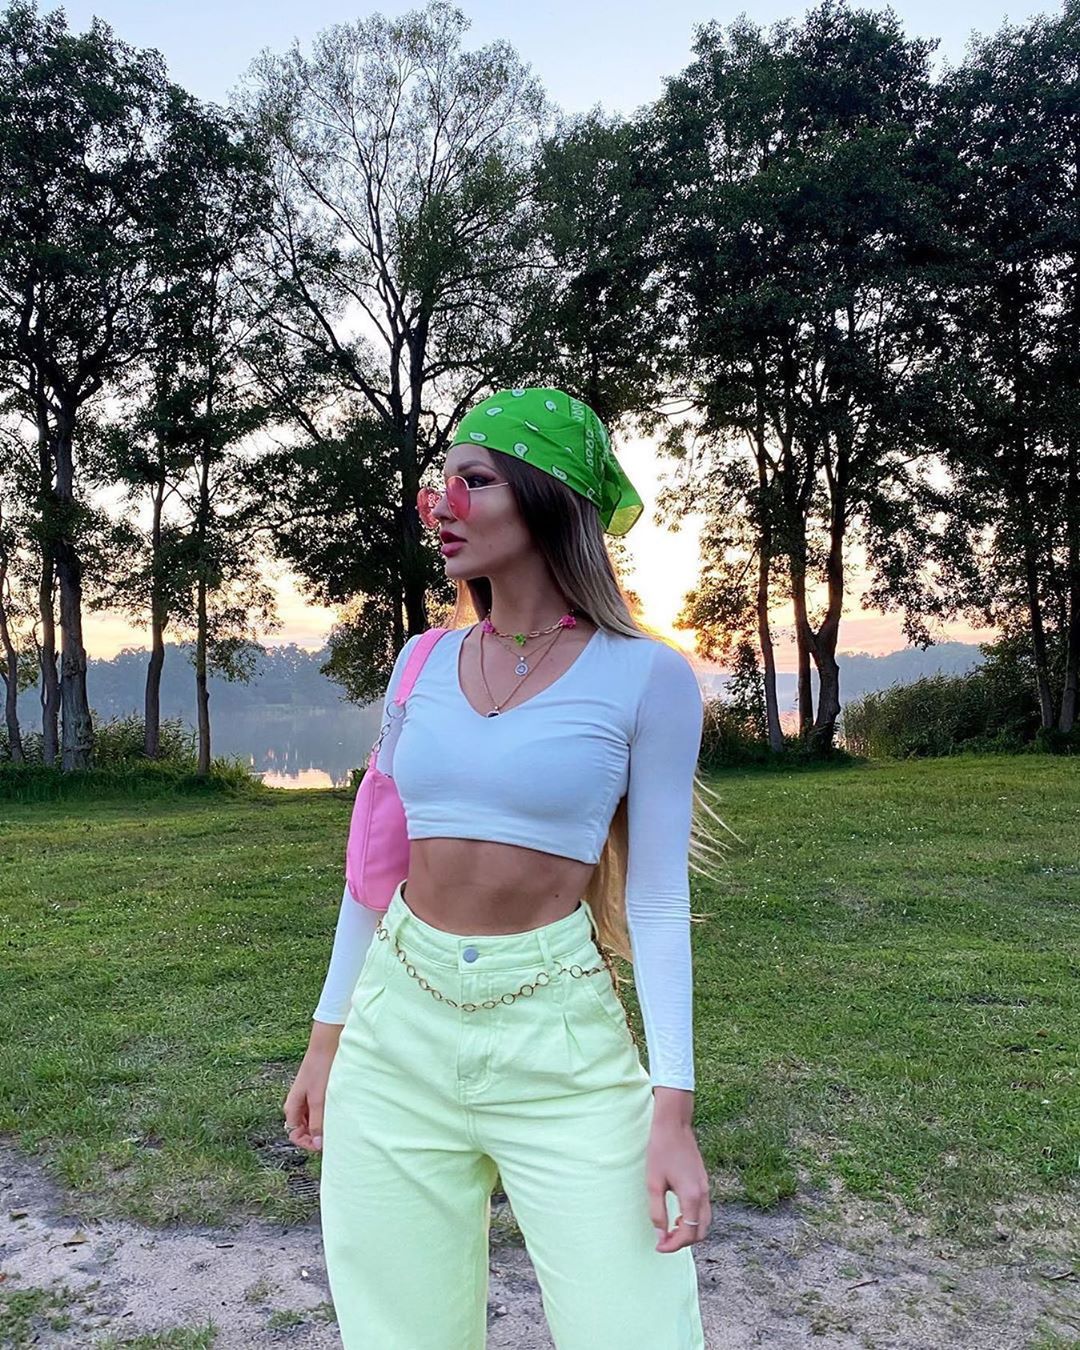 SHEIN.COM - Just casually slaying it! 💚  @endzel_

Shop Item #: 1299931

#SHEINgals #SHEINstyle #SHEINFW2020 #fallvibes